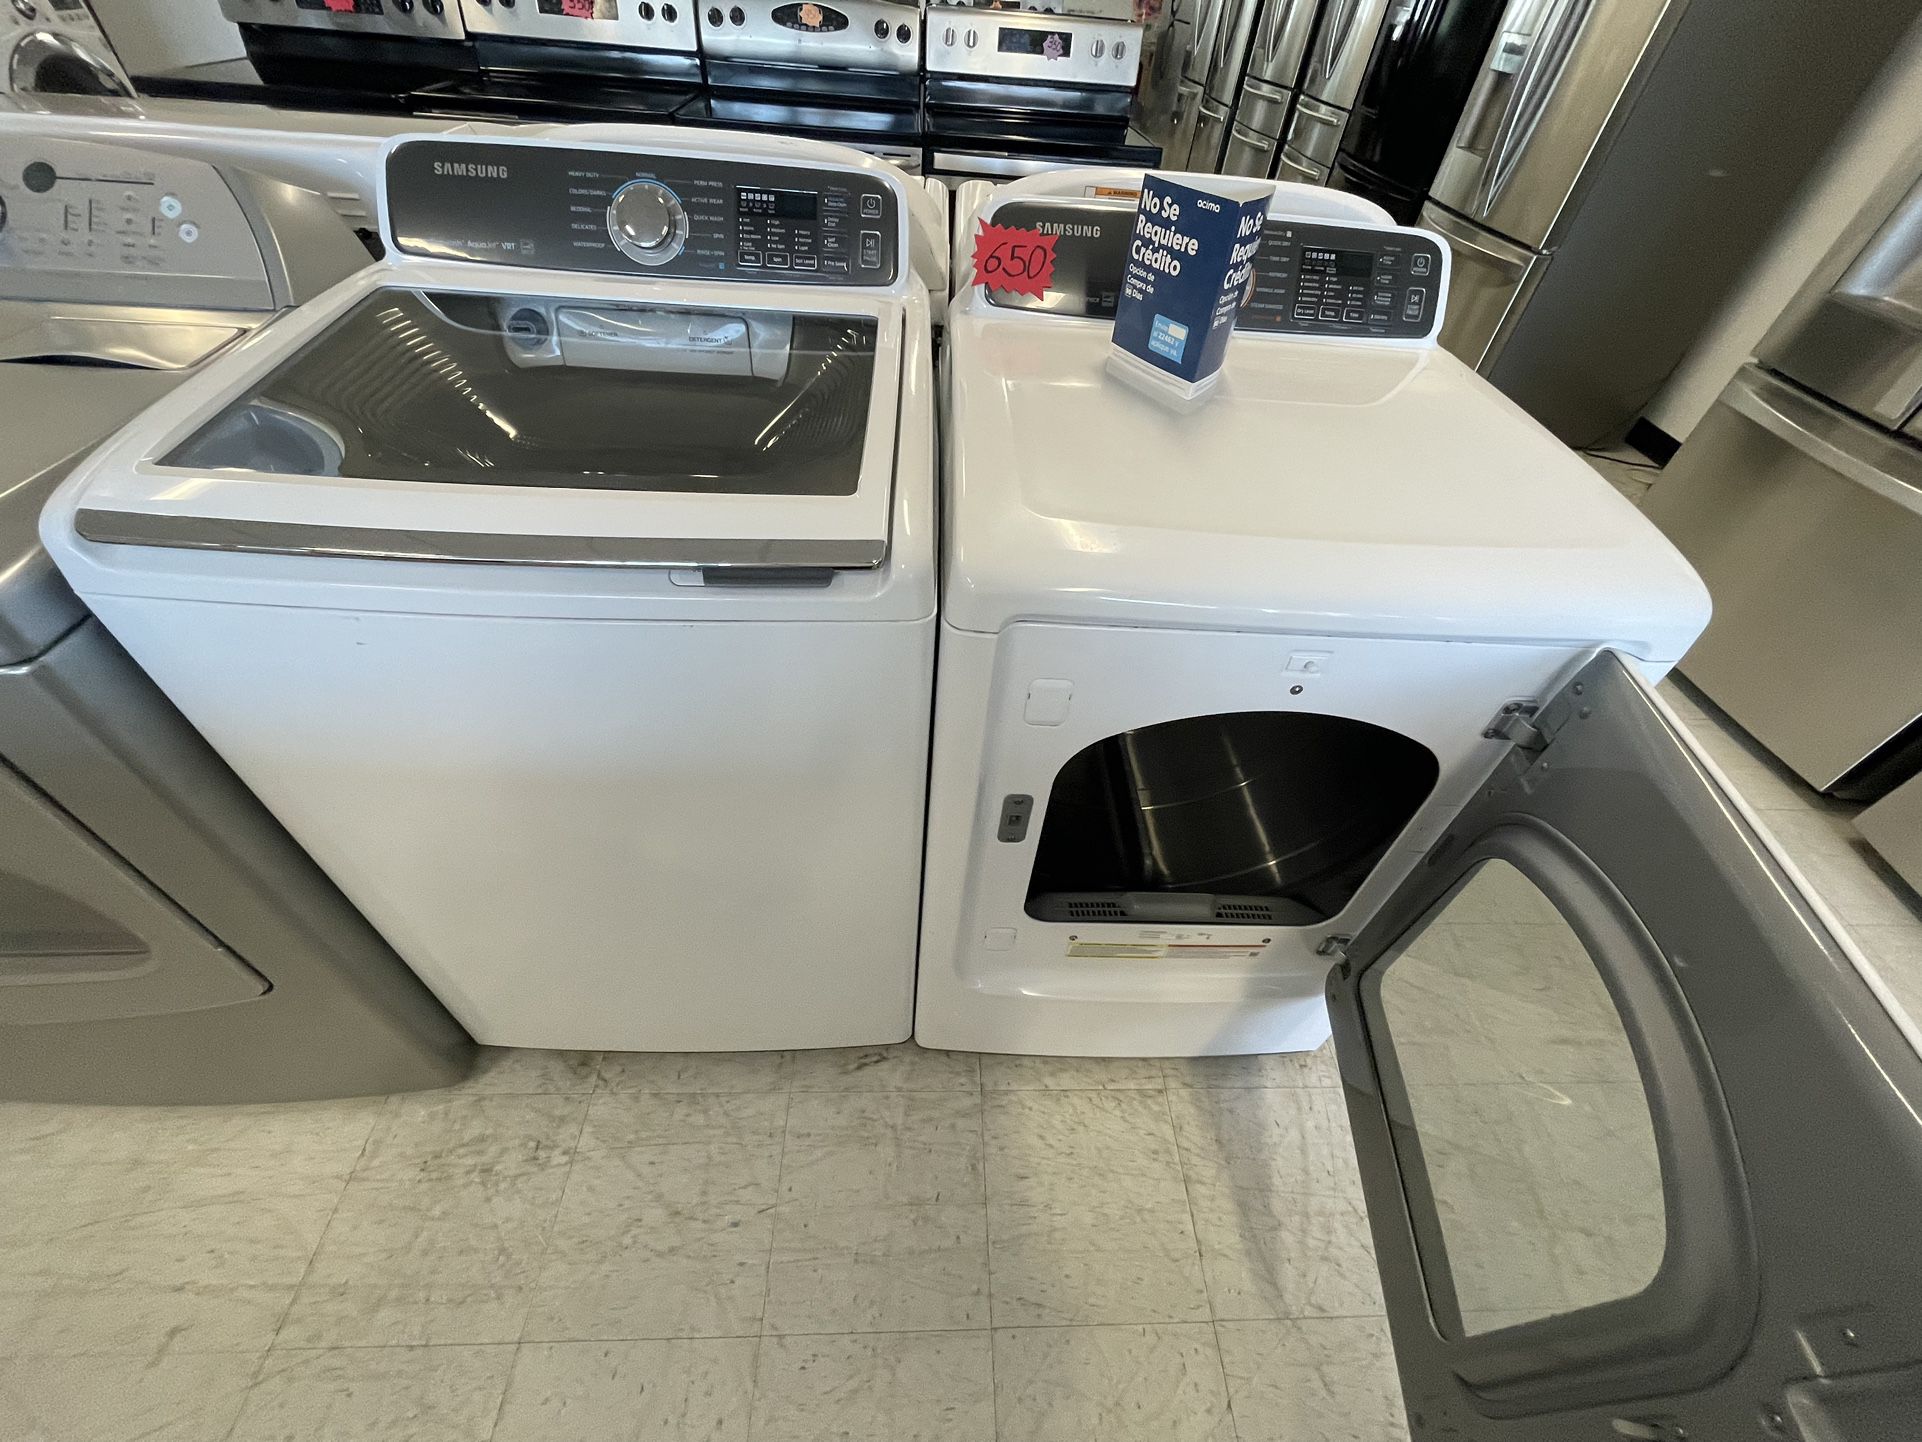 Samsung Tap Load Washer And Electric Dryer Set Used Good Condition With 90days Warranty 